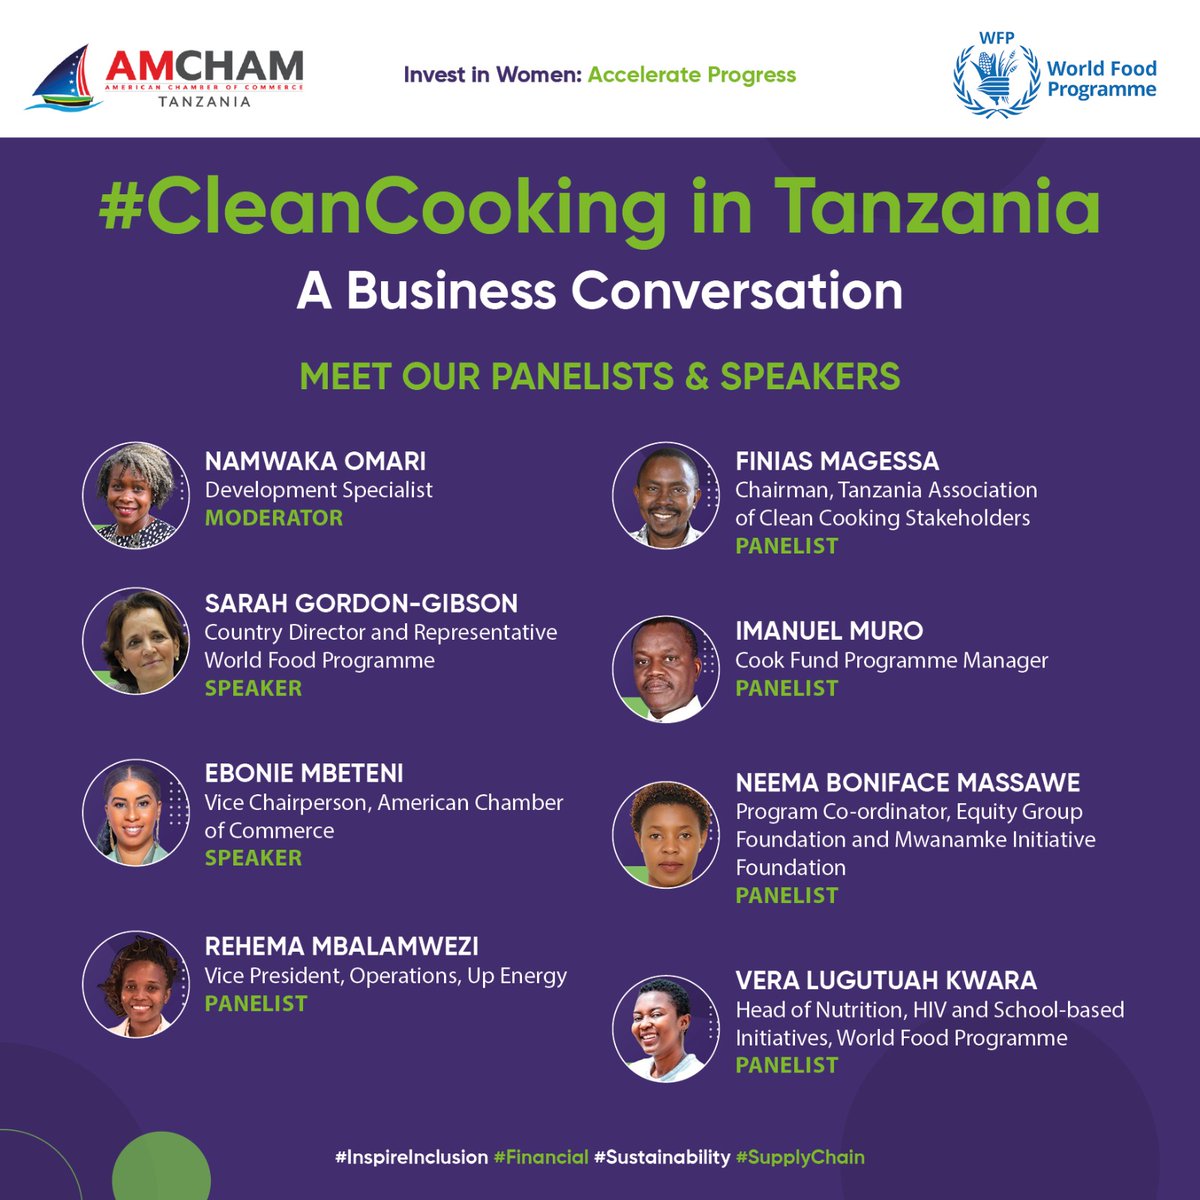 .@WFP_Tanzania is proudly collaborating with @AmChamTZ to promote clean cooking in #Tanzania Together, we can create a healthier & sustainable future for all. #CleanCooking